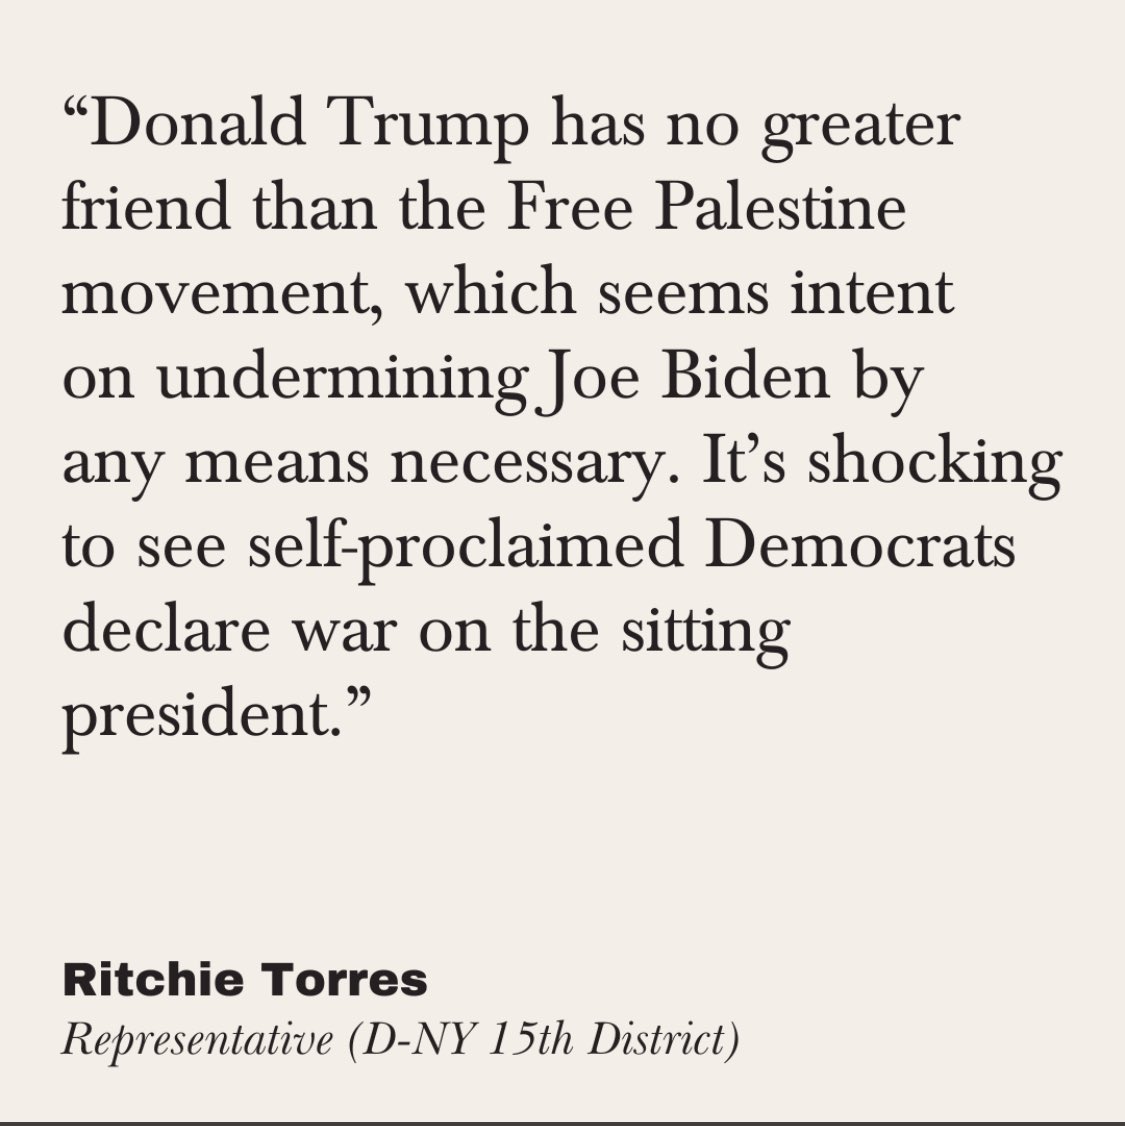 Donald Trump has no greater friend than the Free Palestine movement, which is intent on undermining Joe Biden by any means necessary. thefp.com/p/activists-pl…